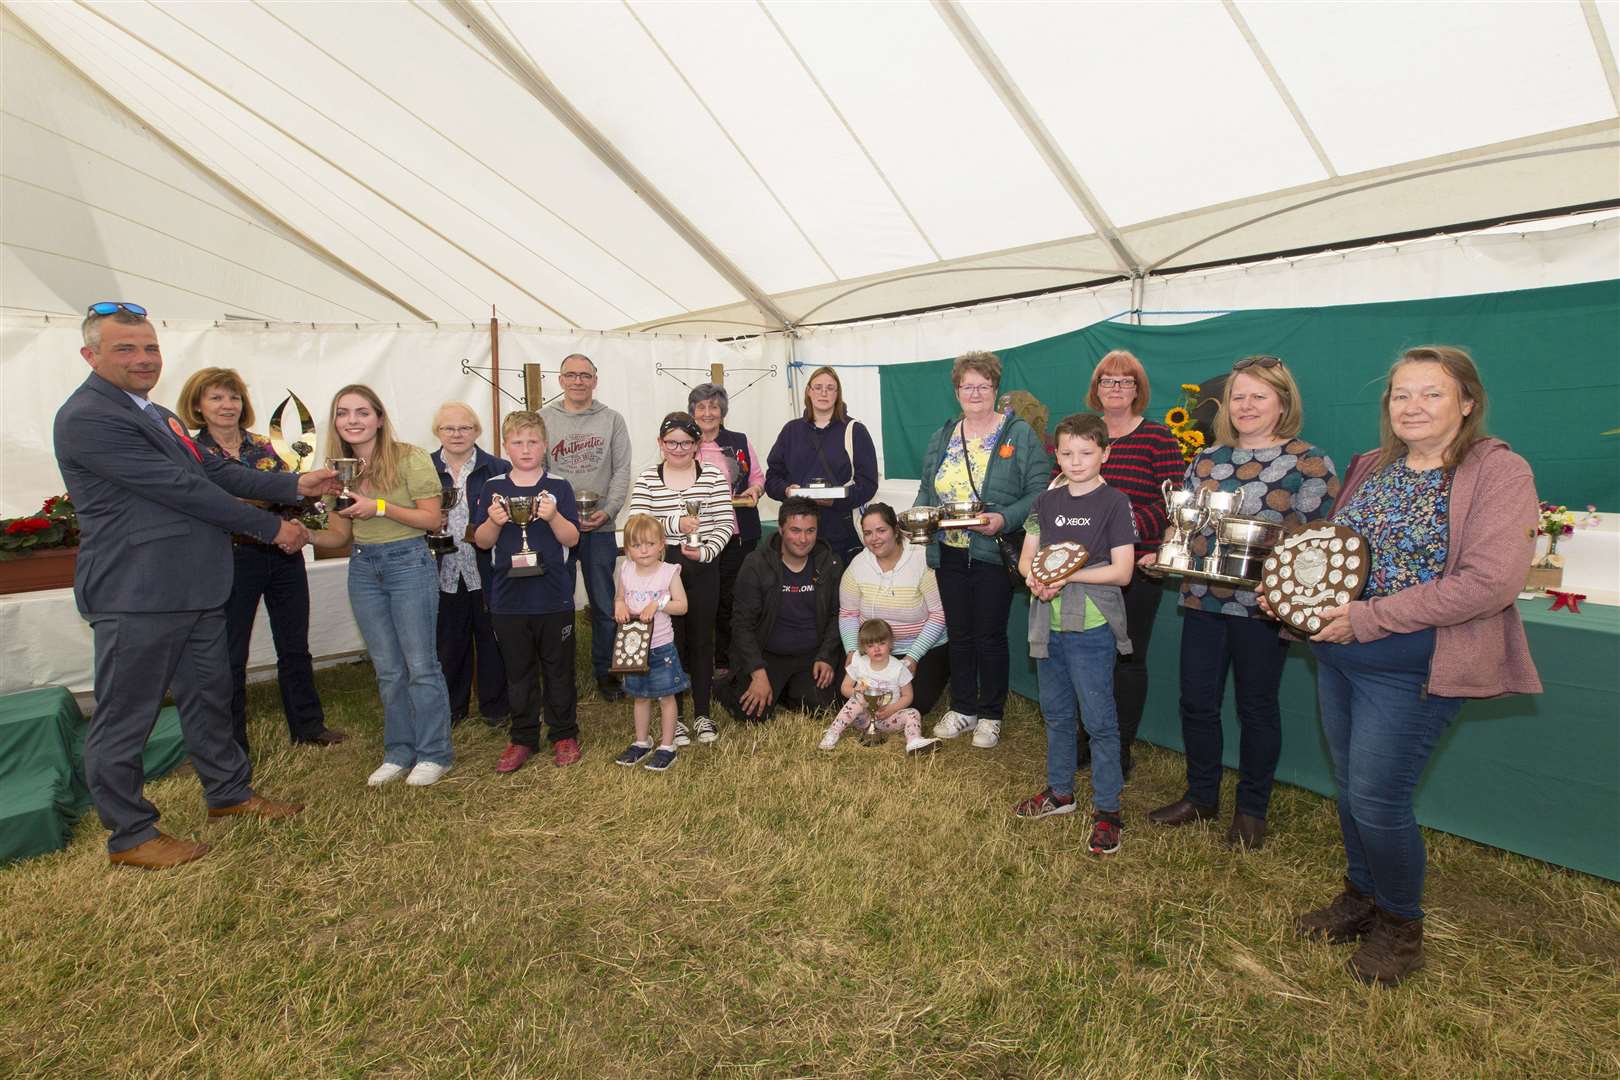 Caithness Agricultural Society president John Murray presents the overall junior trophy to Mirissa Efemey, while looking on are other flower show trophy-winners. Carol Grant (second left) won the Elspeth Sutherland Memorial Trophy, a new award for most points overall. Picture: Robert MacDonald / Northern Studios